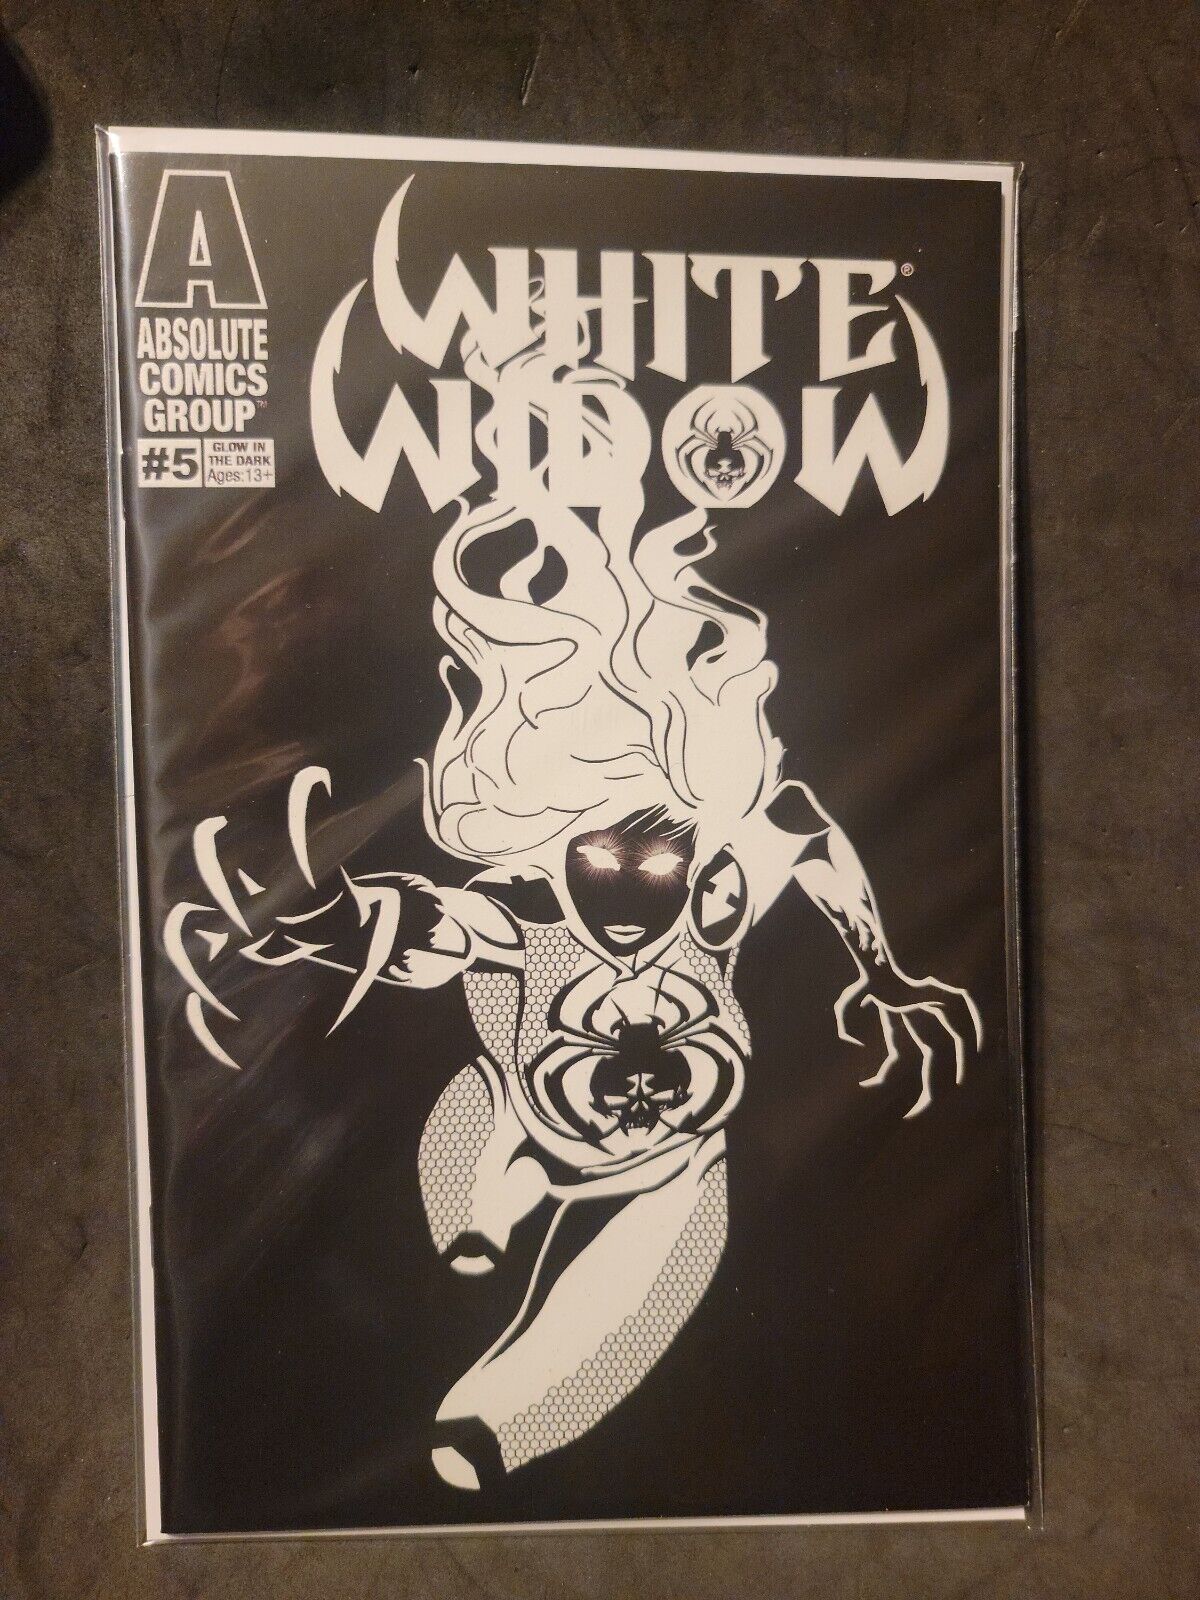 White Widow #5. Glow in the Dark cover Variant.💎💎RARE💎💎